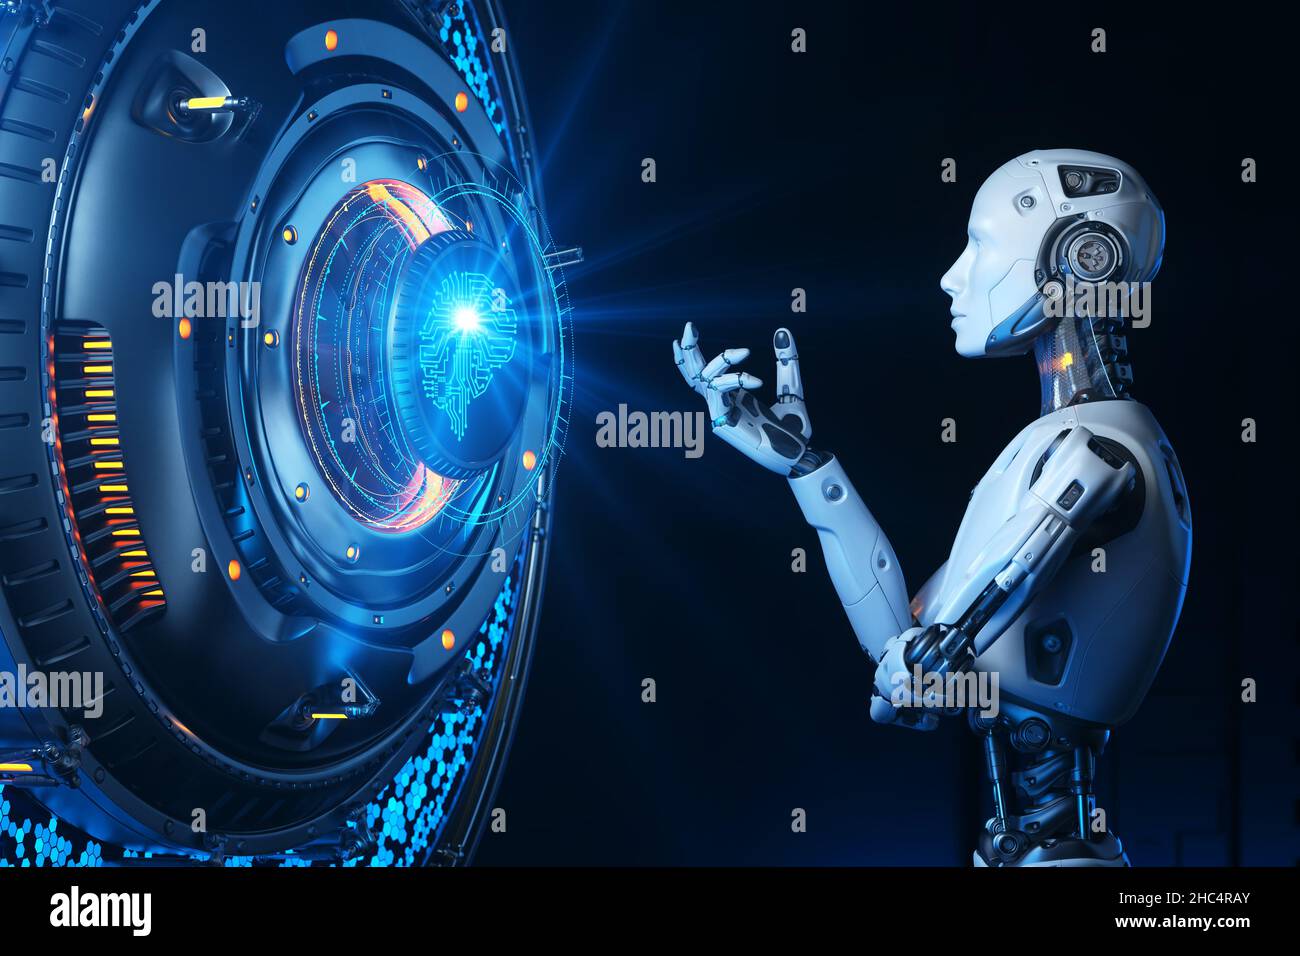 Human like robot talking to artificial intelligence. Concept. 3D illustration Stock Photo